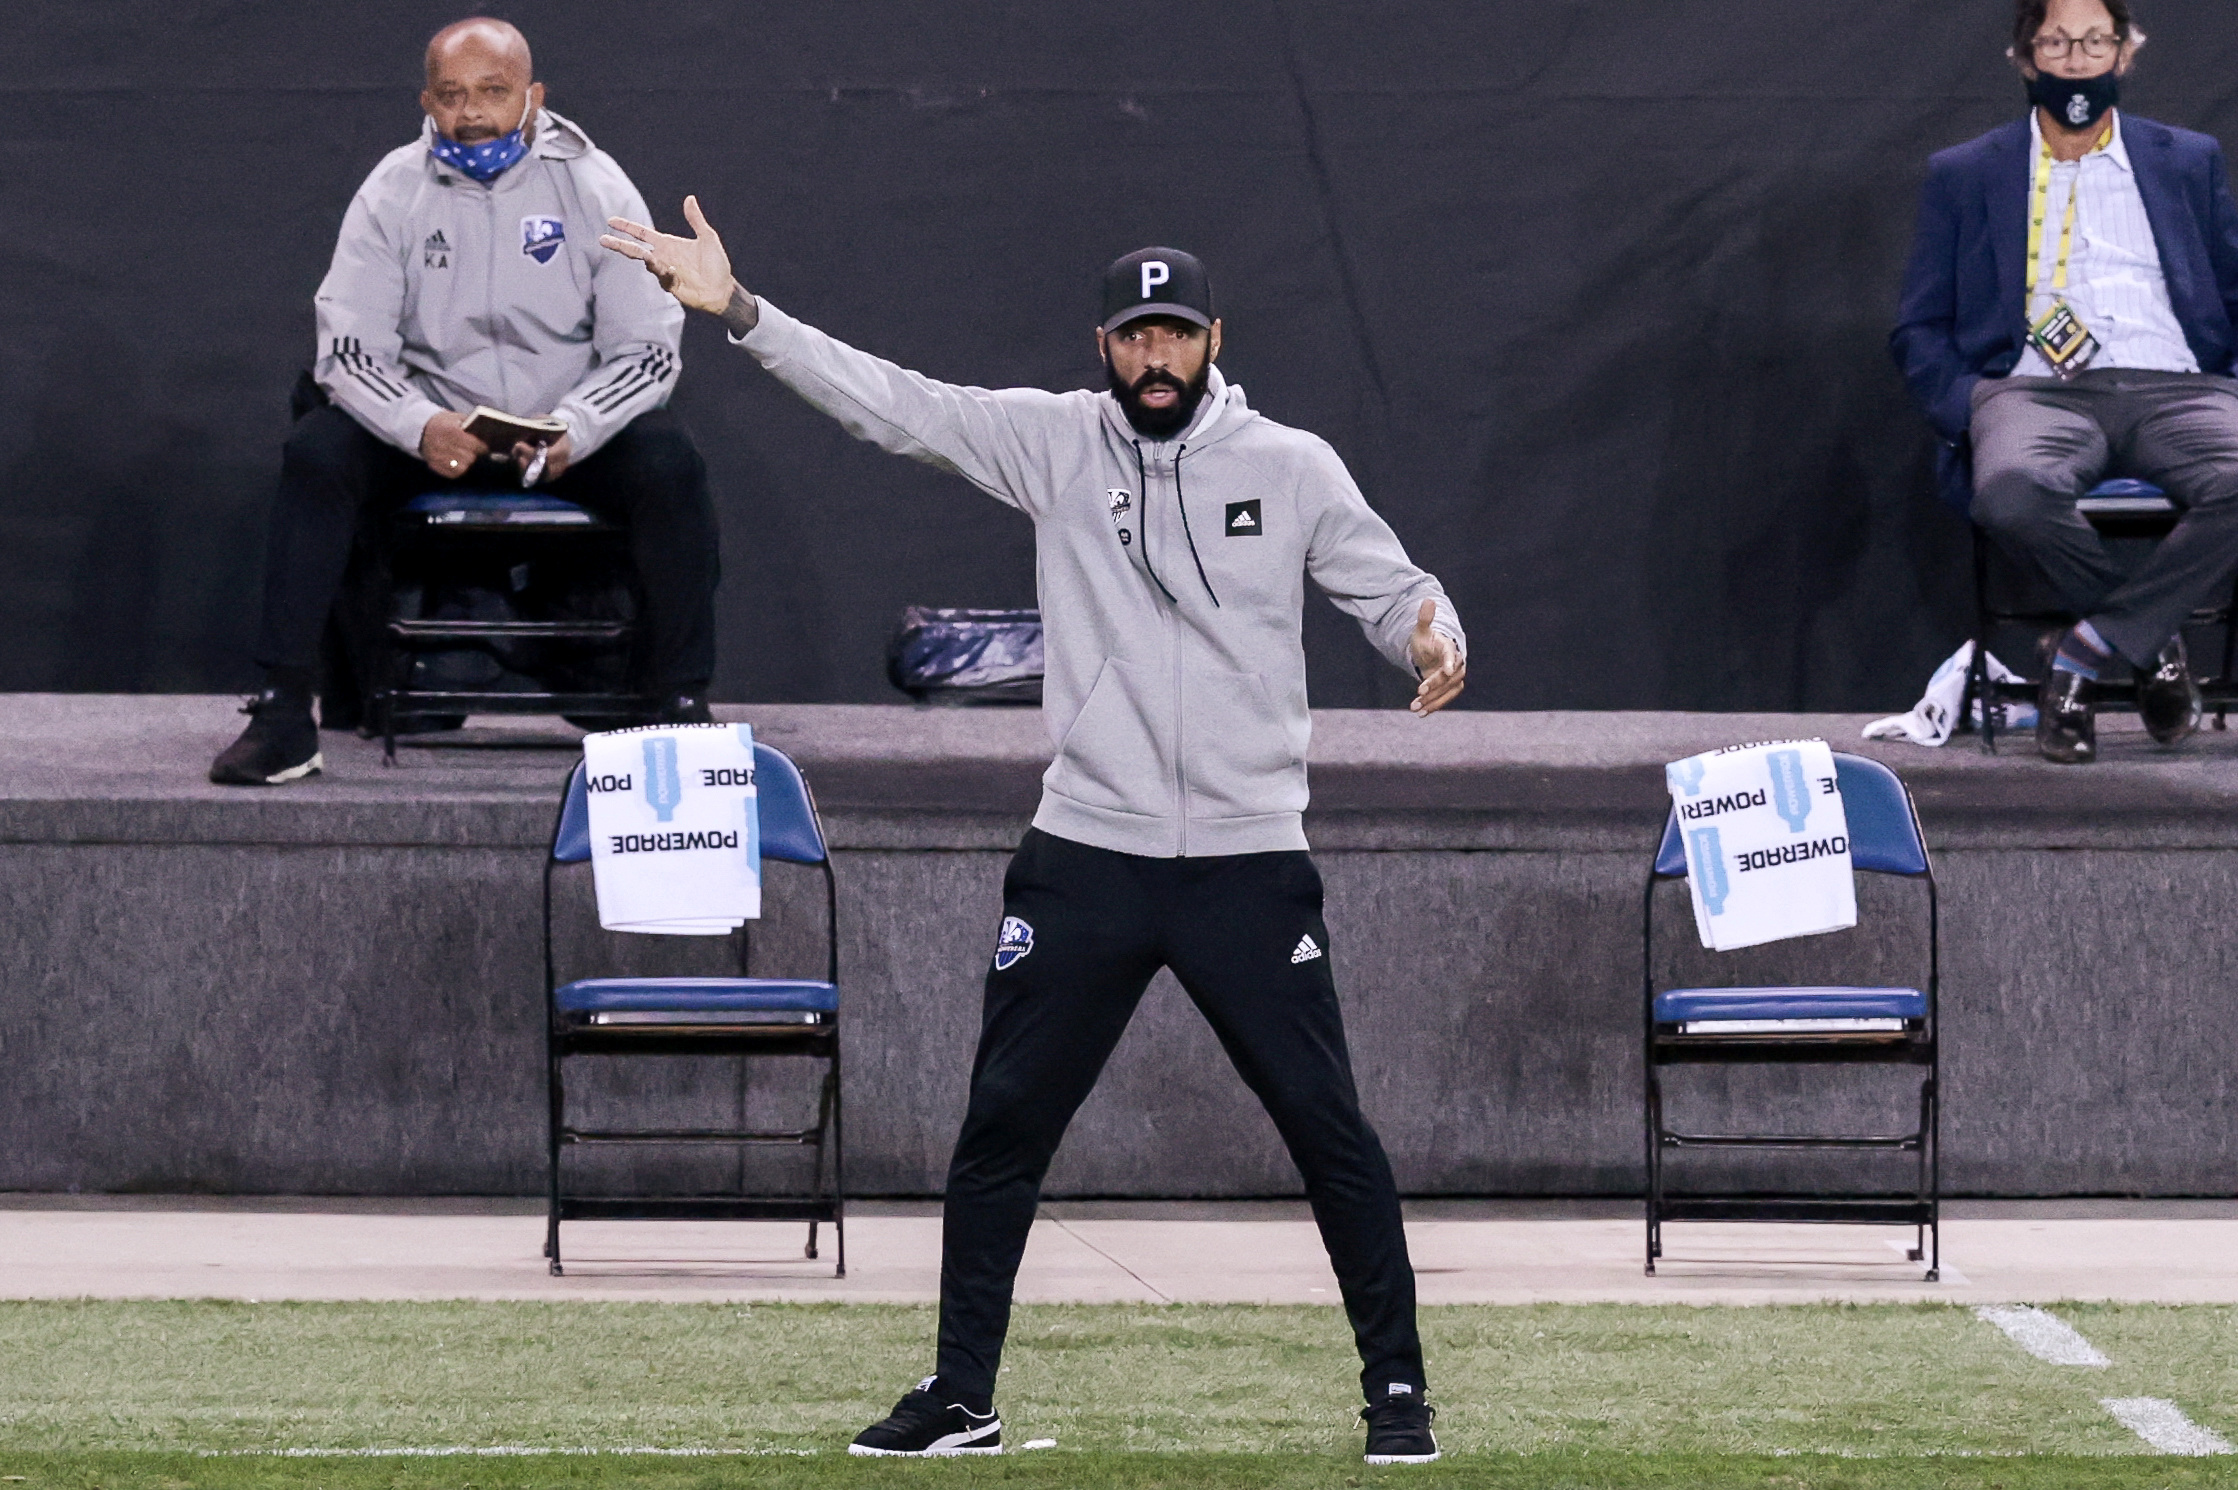 Thierry Henry eager for fresh start as Montreal Impact head coach